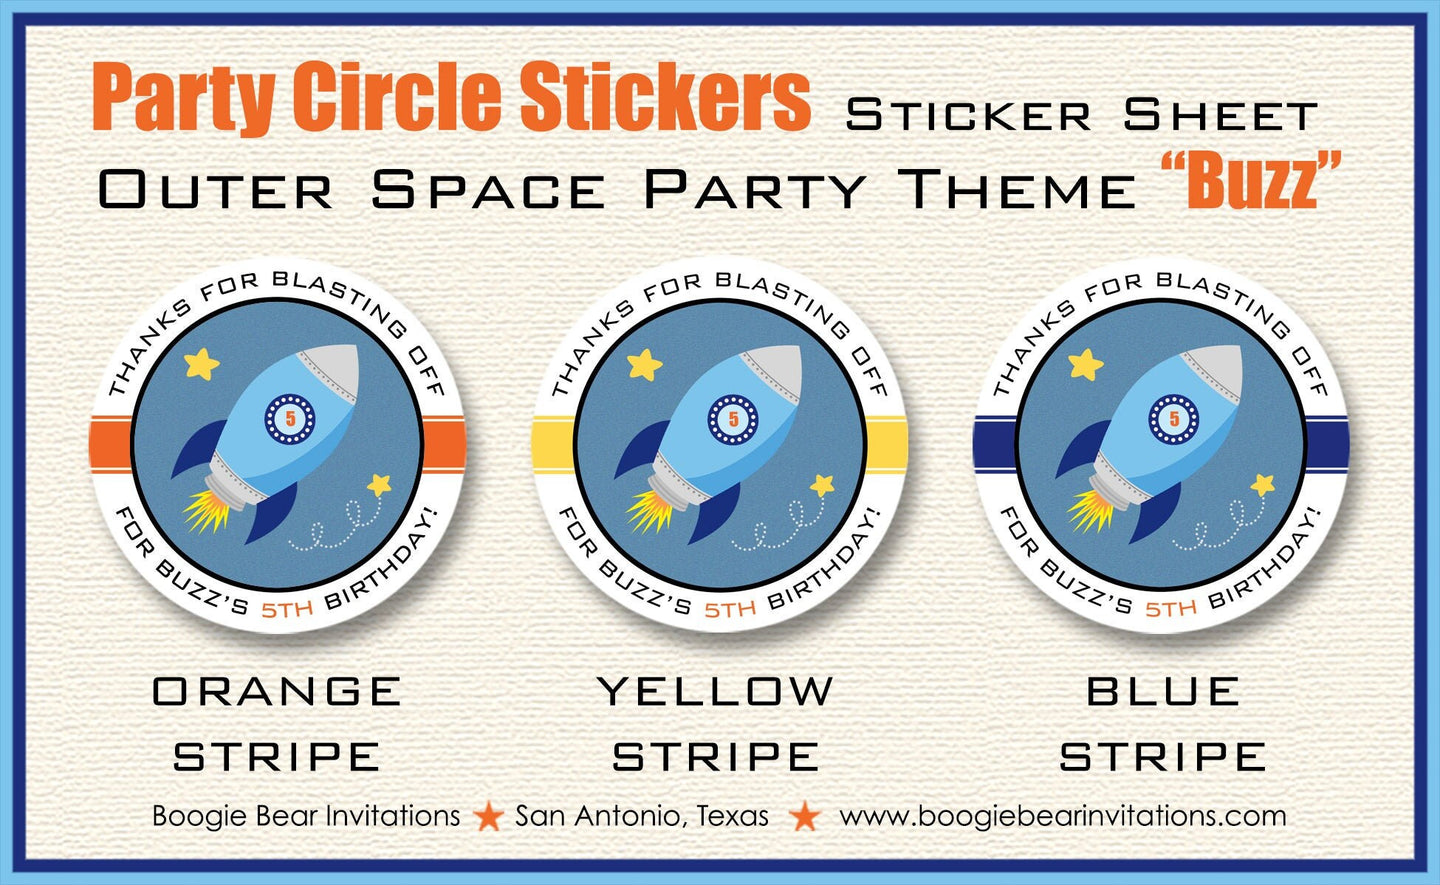 Outer Space Birthday Party Stickers Circle Sheet Round Rocket Ship Orange Solar System Galaxy Rocket Ship Boogie Bear Invitations Buzz Theme